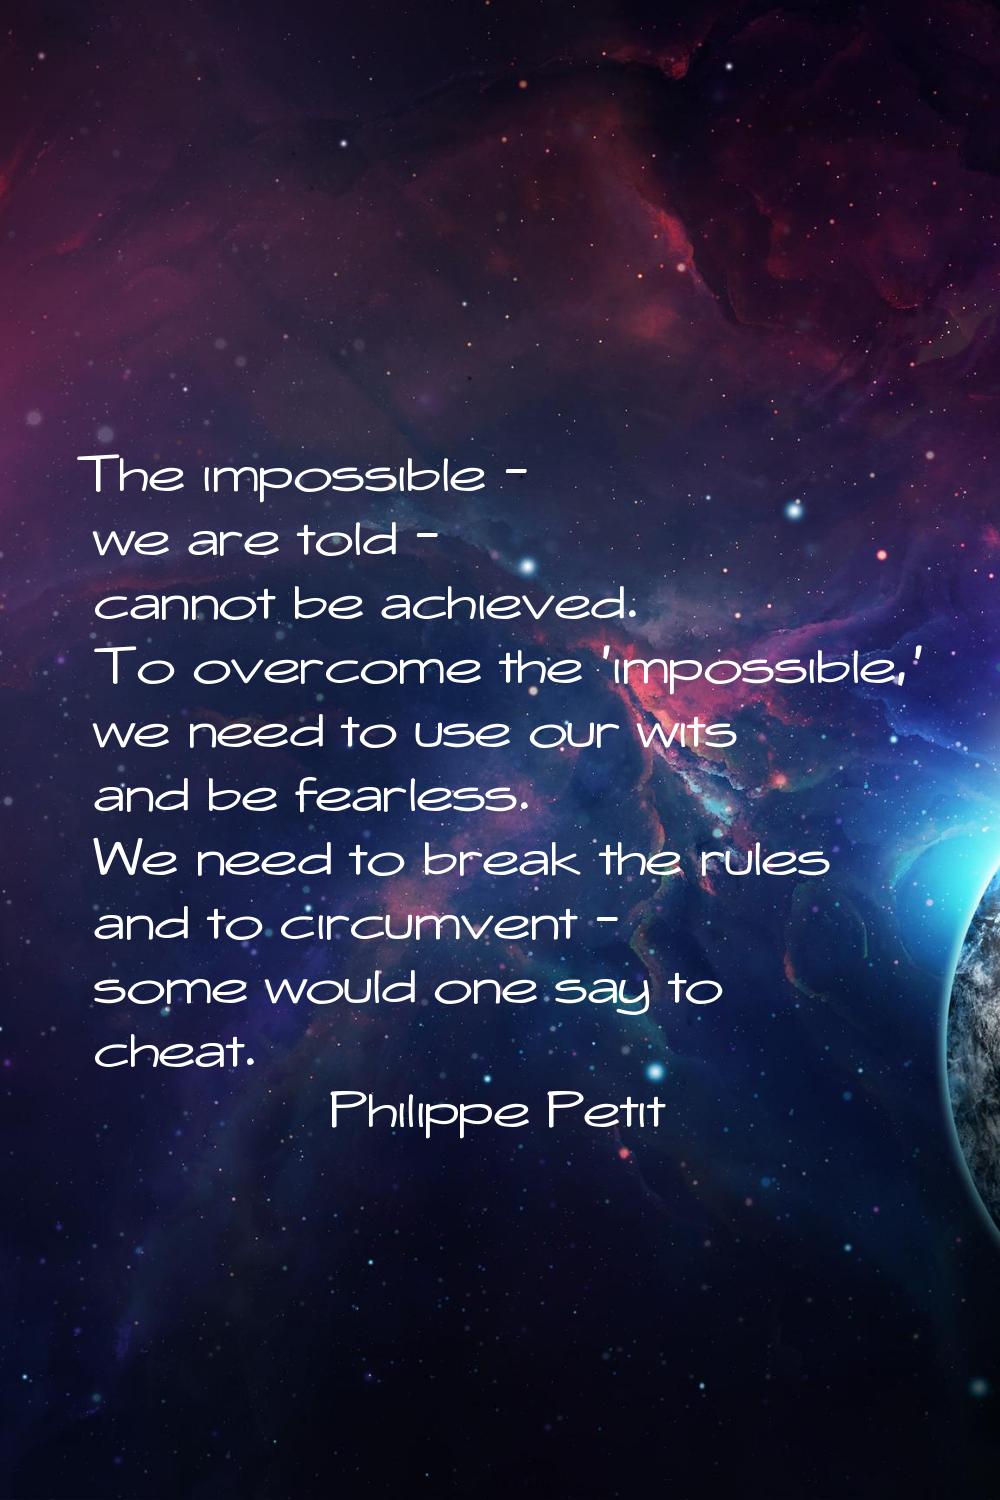 The impossible - we are told - cannot be achieved. To overcome the 'impossible,' we need to use our